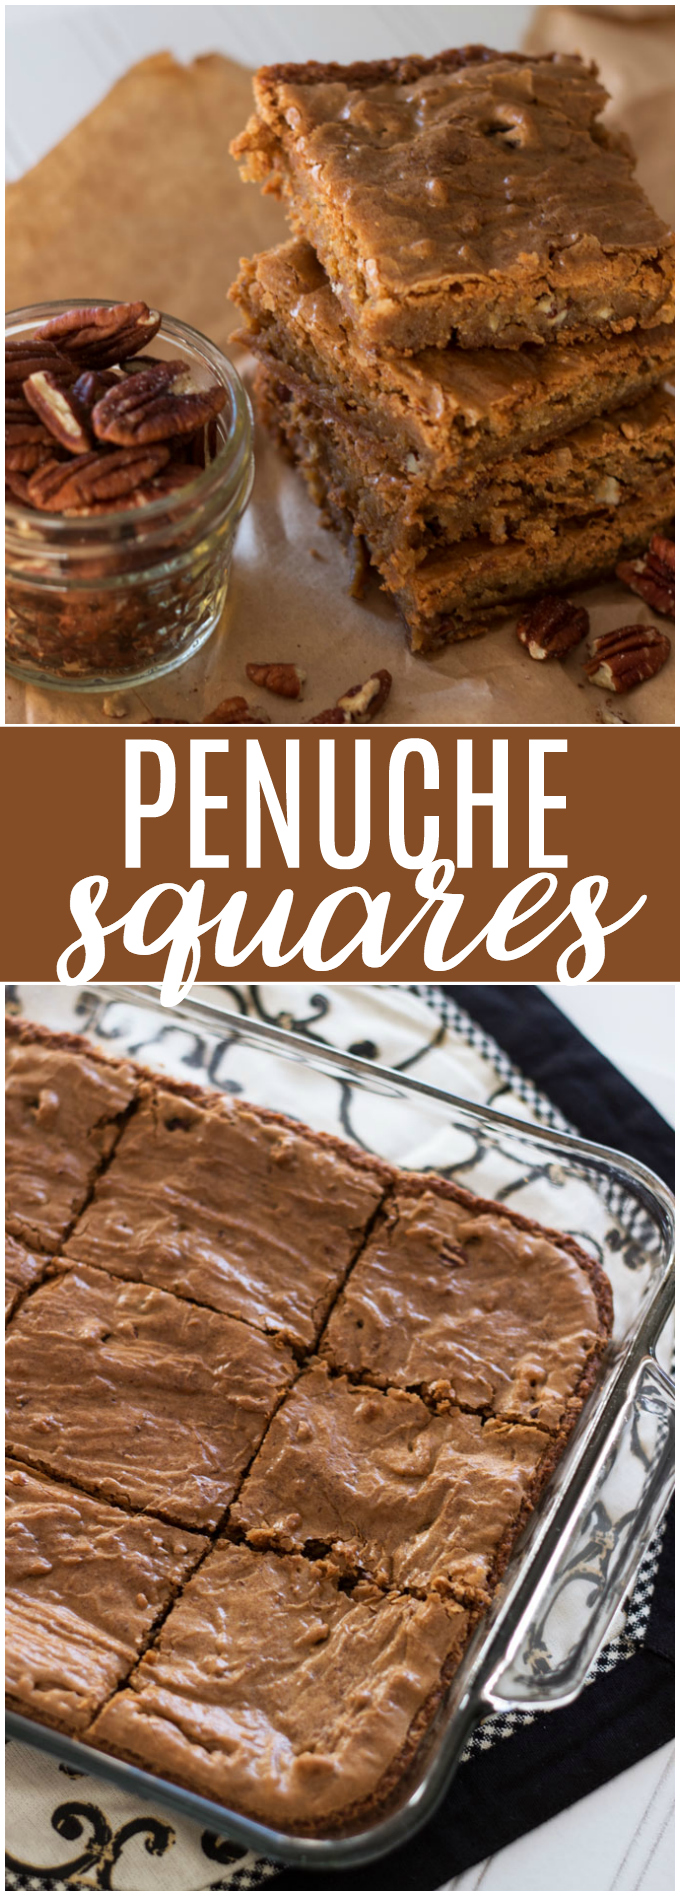 Penuche Squares - Delicious Southern dessert! Top with powdered sugar for a beautiful baked bar.